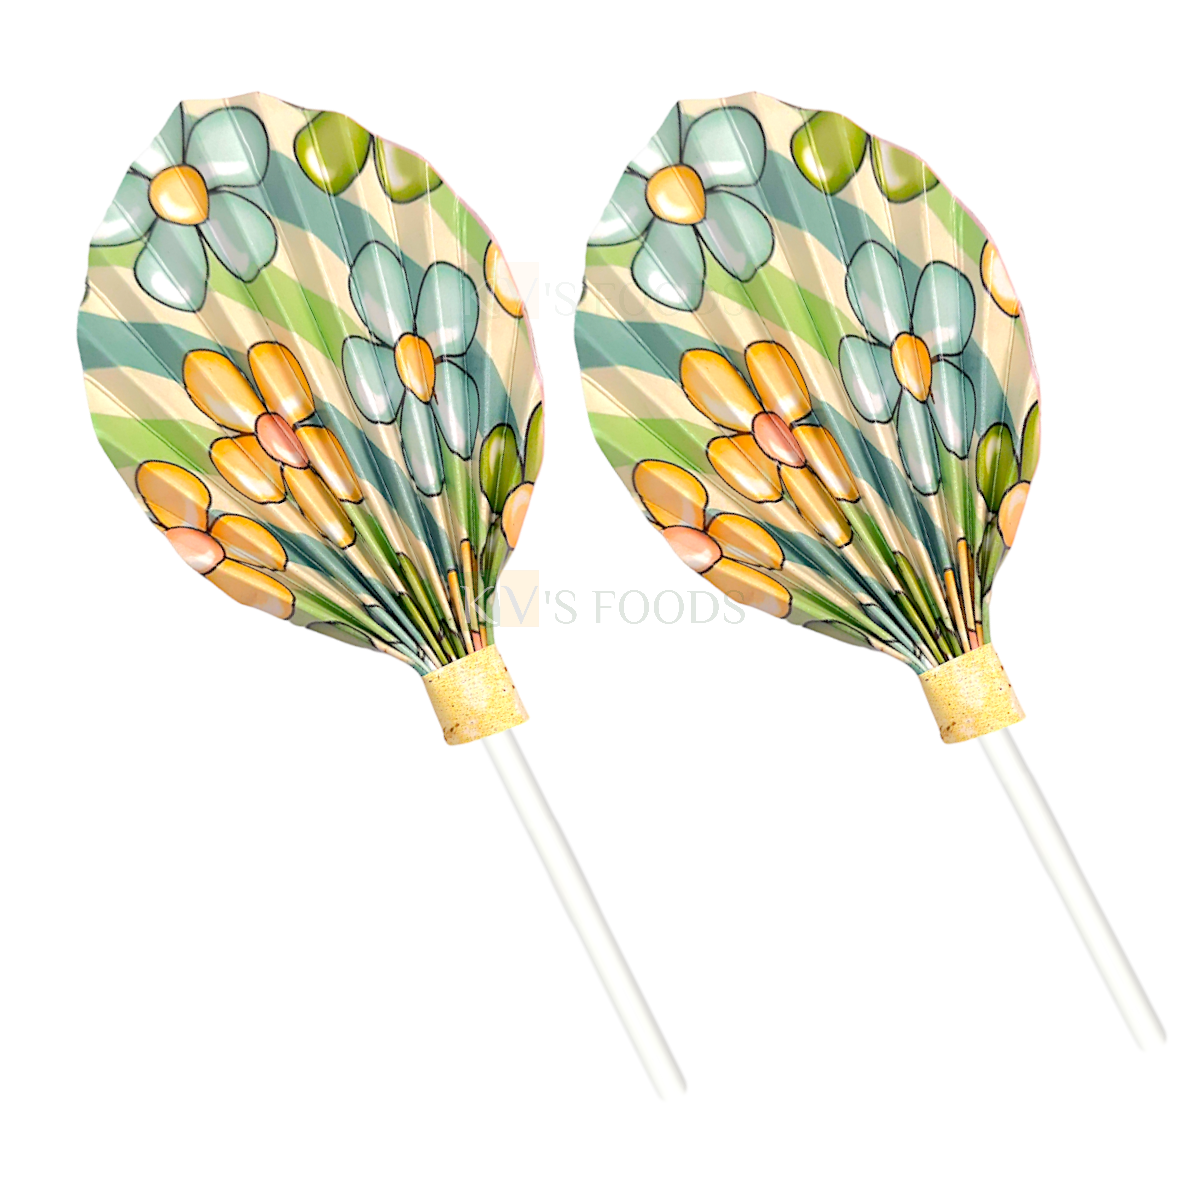 2PC Colourful Printed Paper Palm Leaf Cake Topper Spear Shaped Leaves Cupcake Insert, Birthdays, Engagement Wedding Anniversary Theme Cake Accessories DIY Cake Decorations, Project, Crafts Home Decor